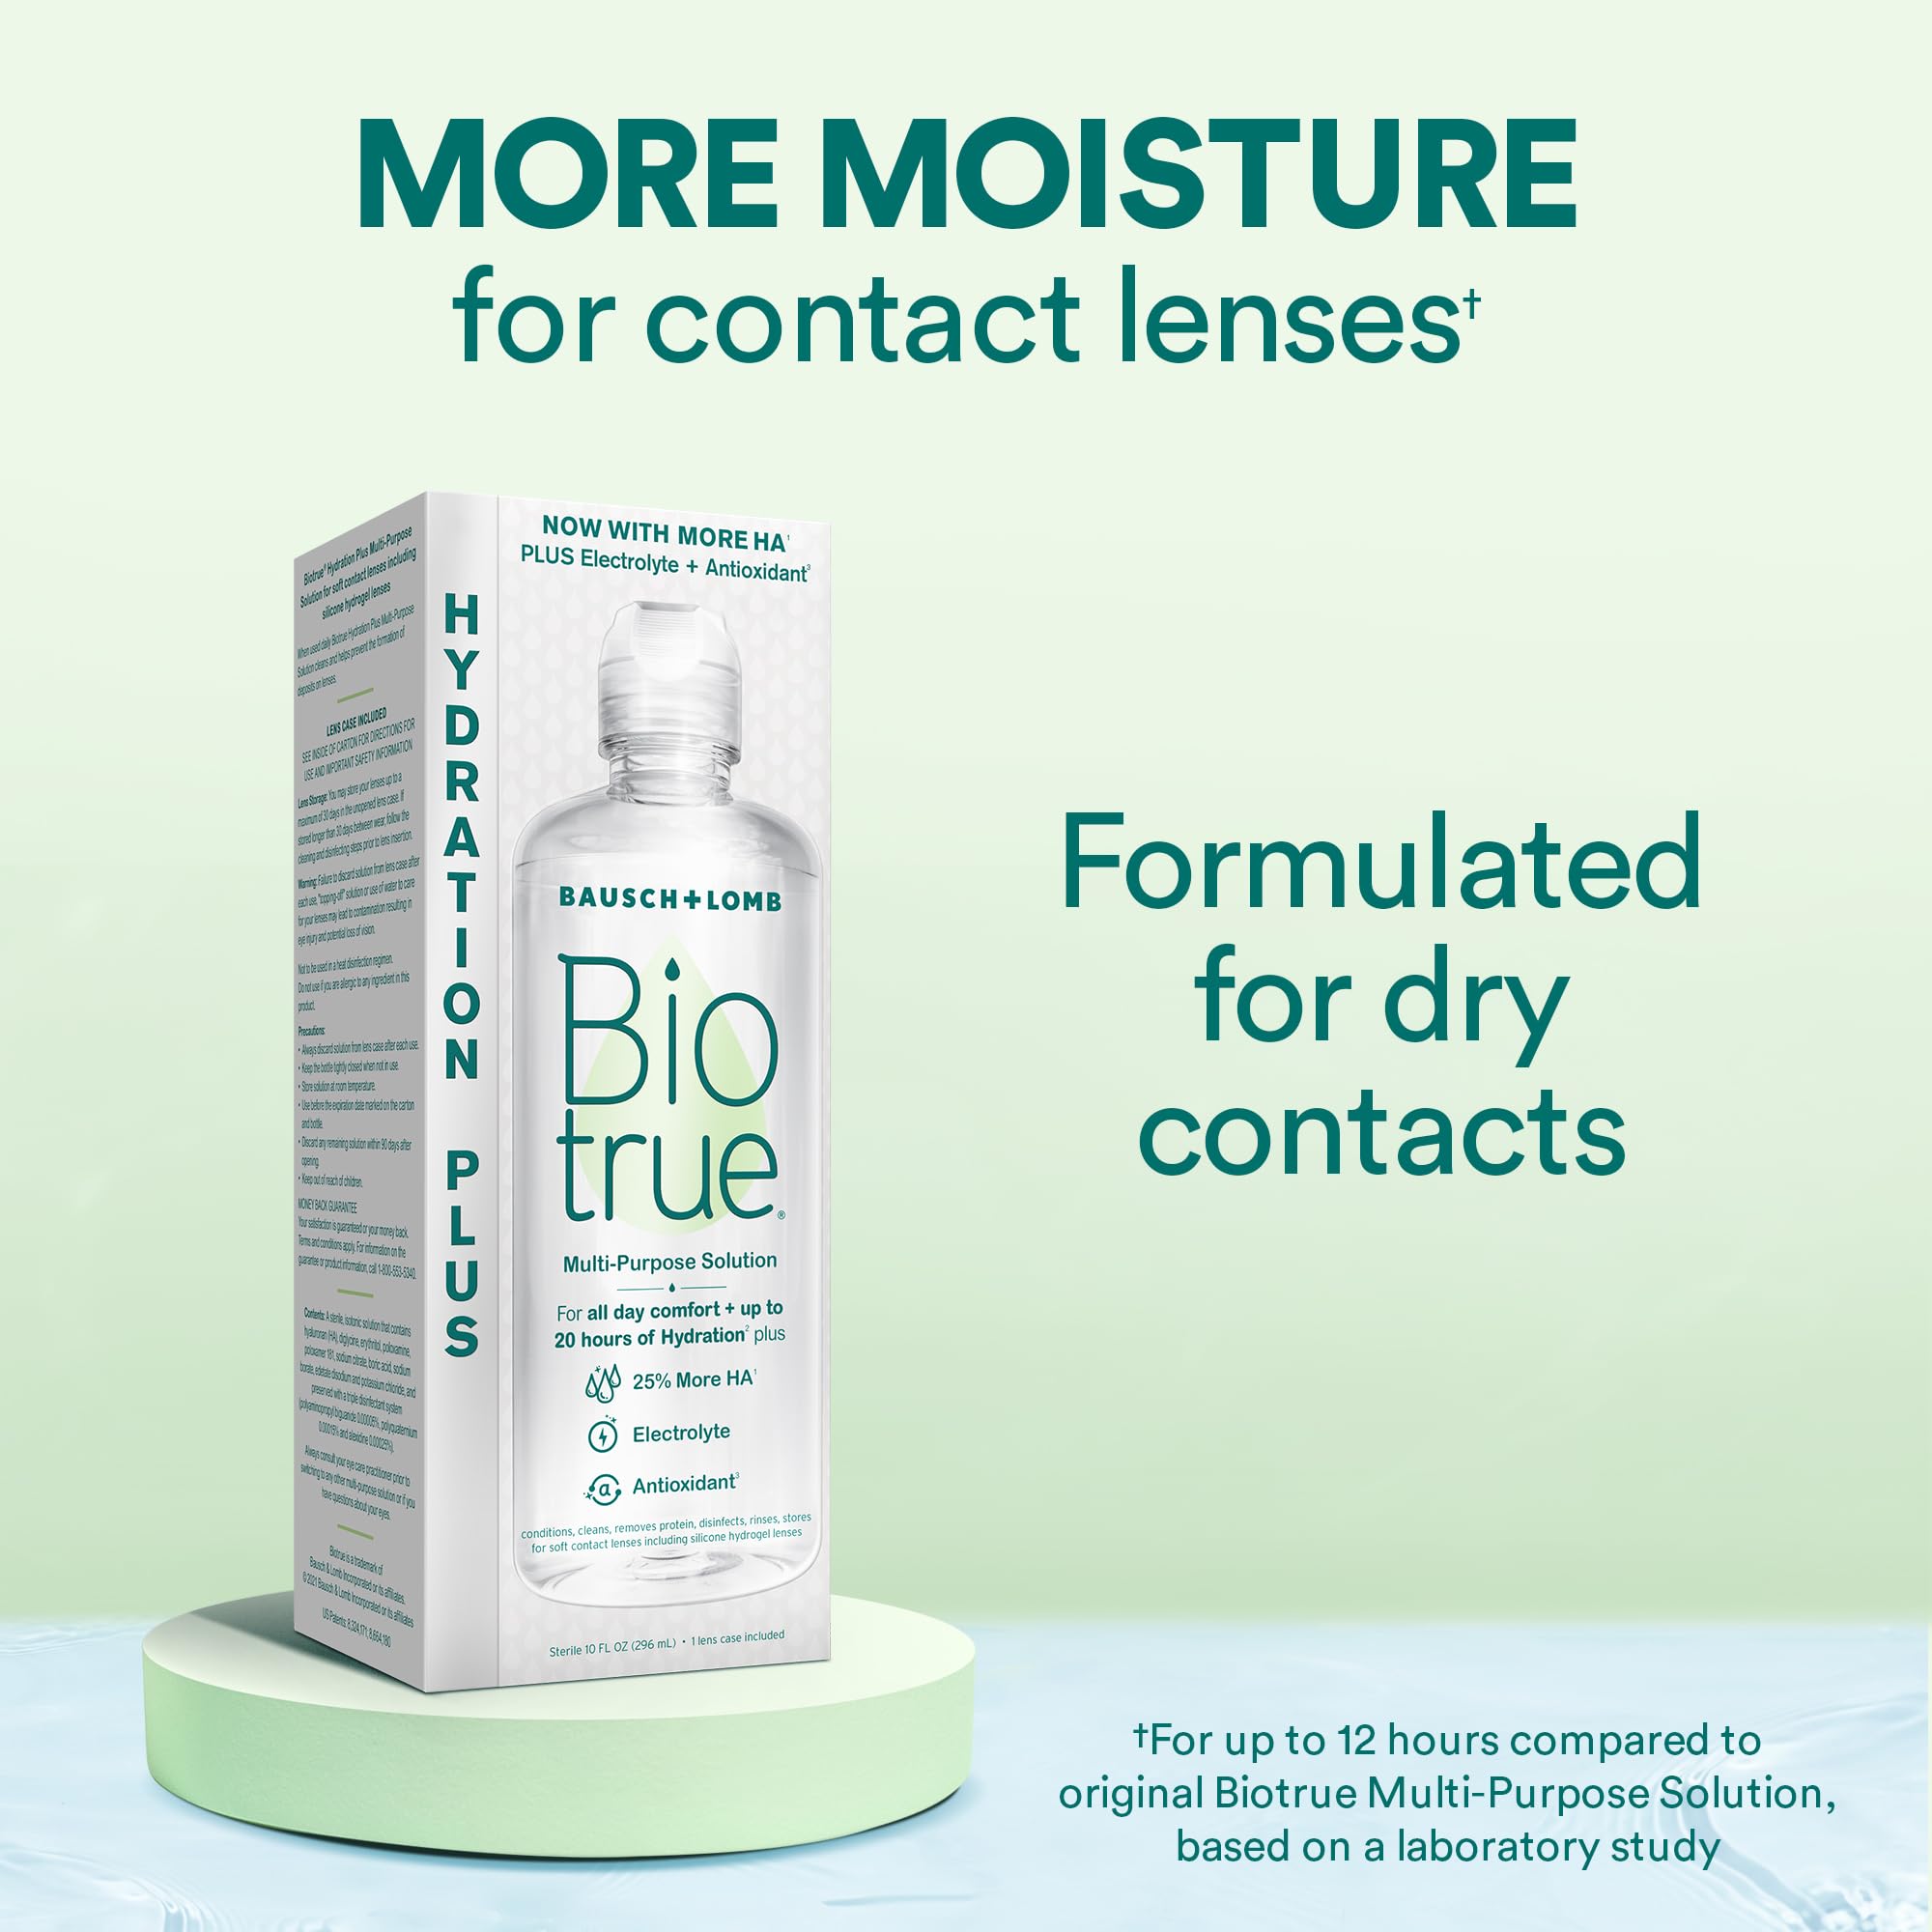 Biotrue Hydration Plus Contact Lens Solution, Multi-Purpose Solution for Soft Contact Lenses, Lens Case Included, 4 FL OZ